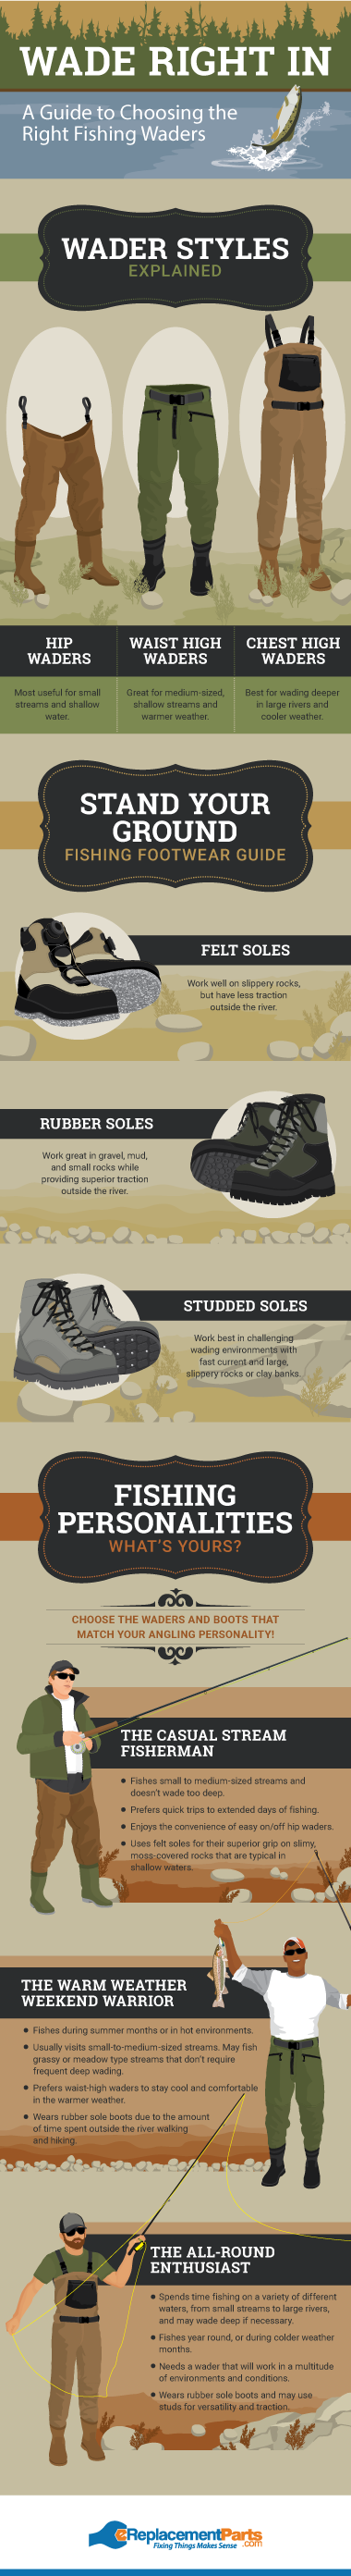 Choosing The Right Type of Waders For You